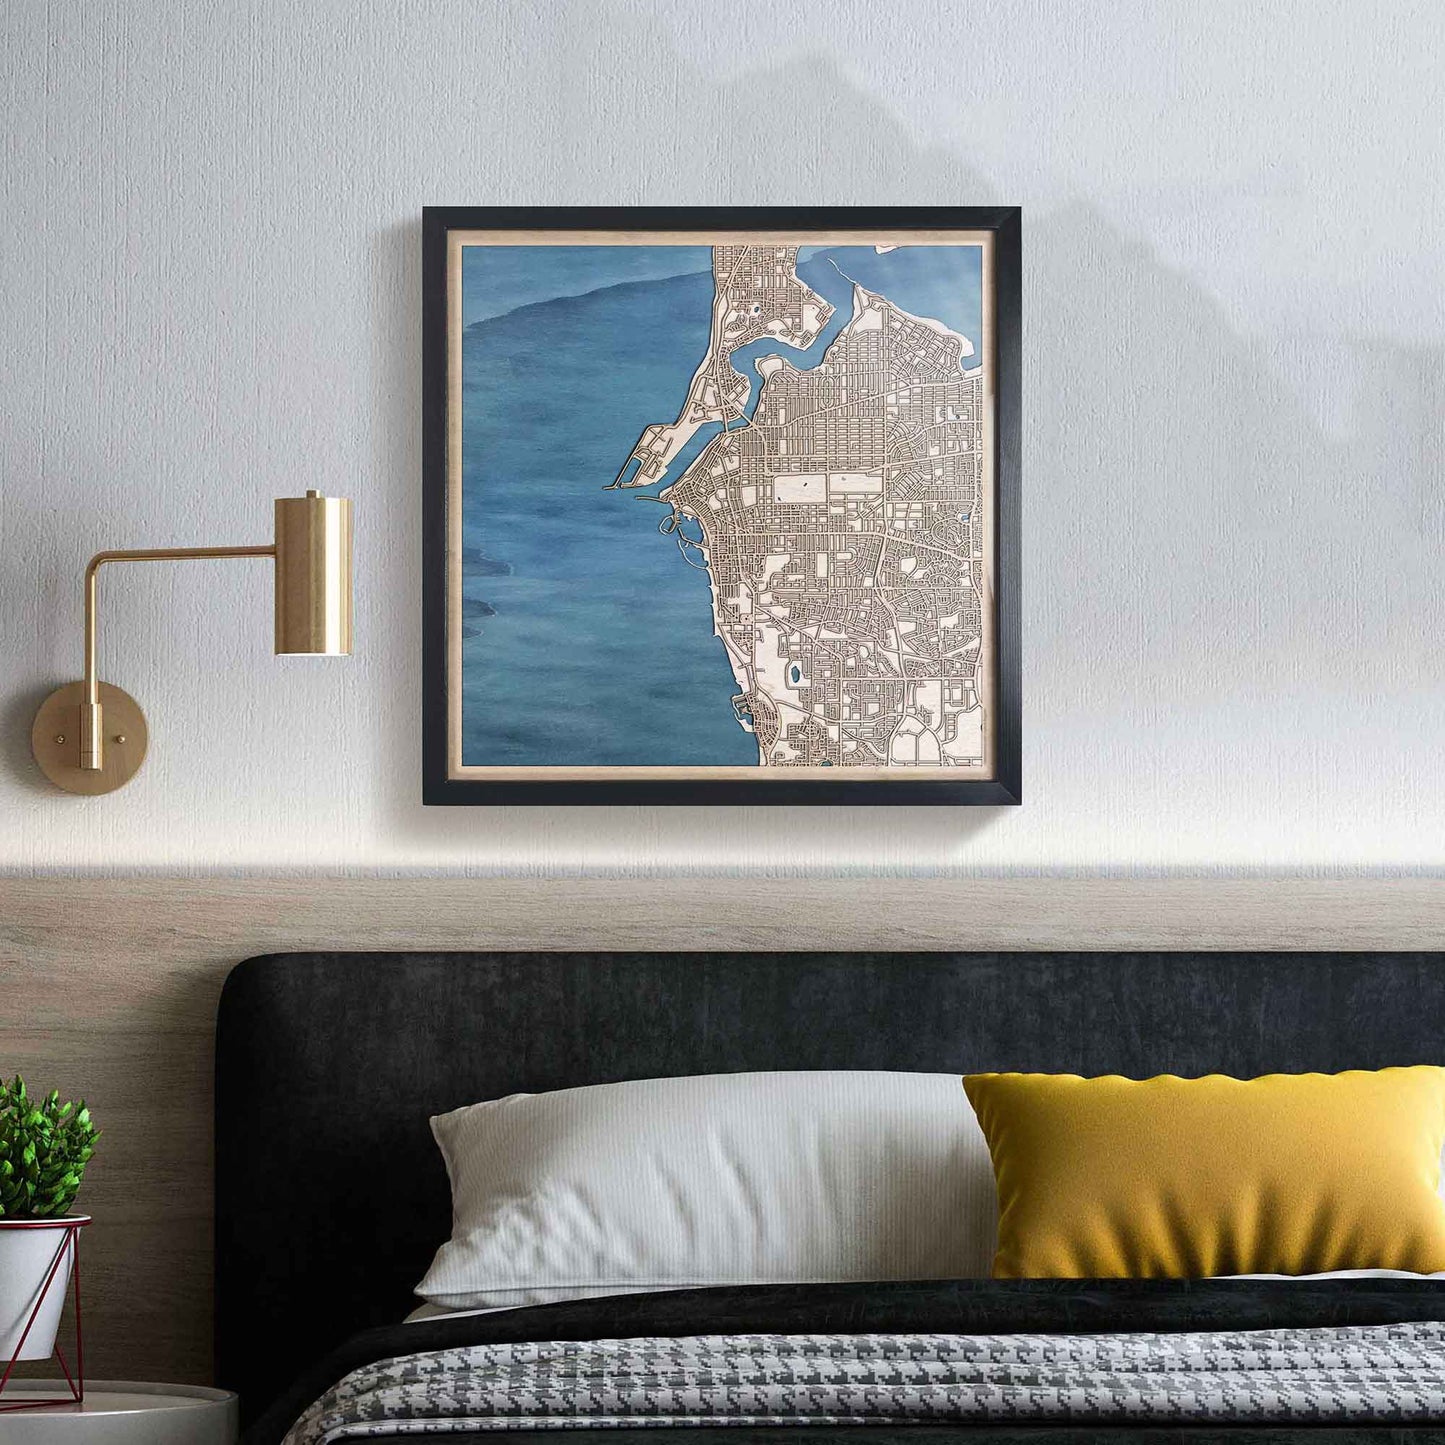 Fremantle Wooden Map by CityWood - Custom Wood Map Art - Unique Laser Cut Engraved - Anniversary Gift